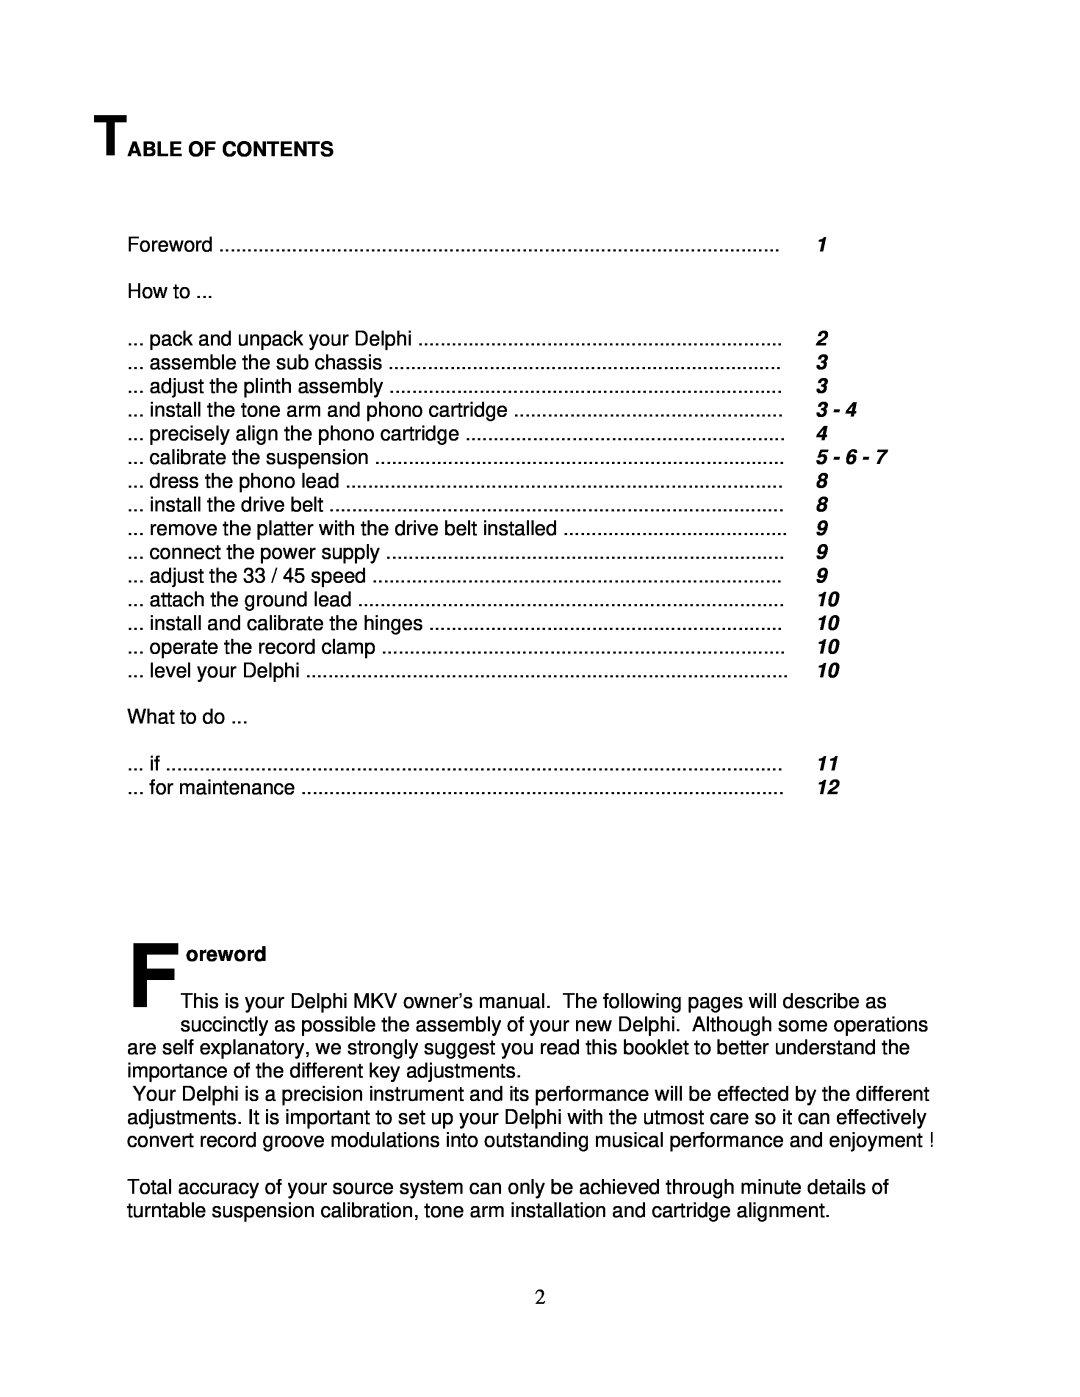 Oracle Audio Technologies V owner manual Table Of Contents, Foreword 